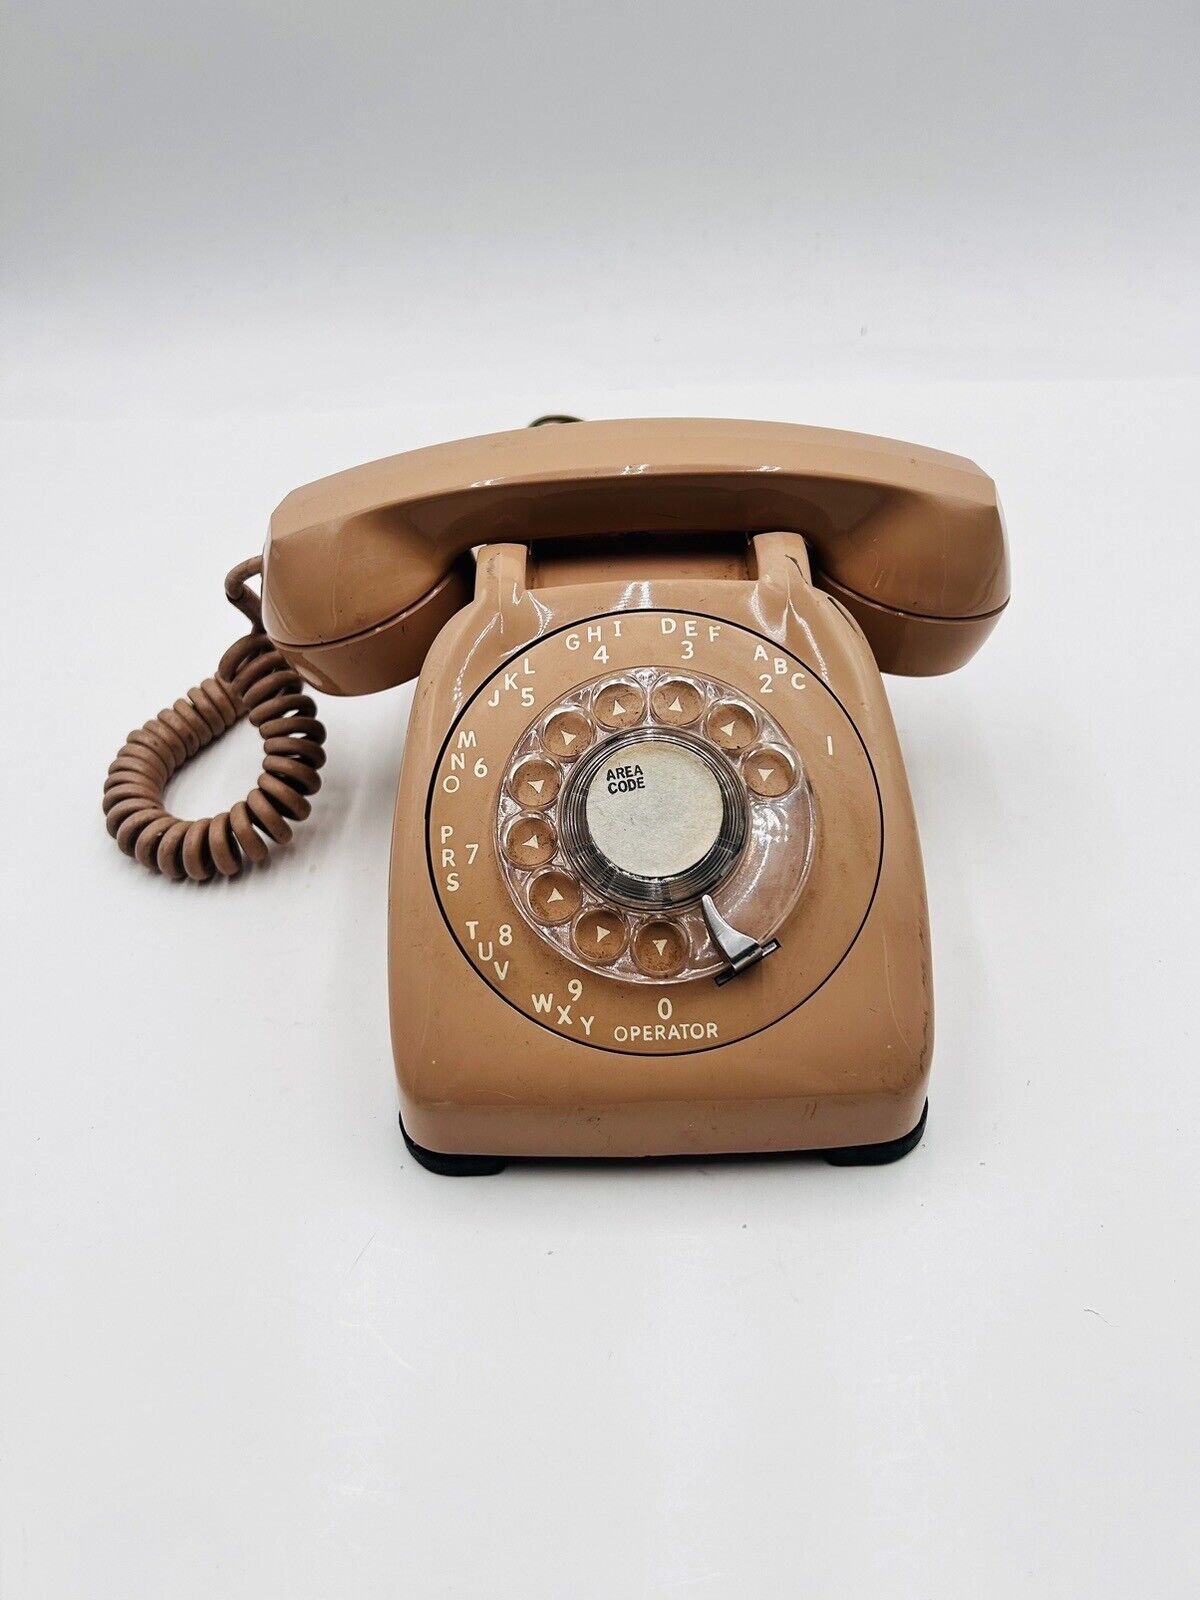 Vintage Automatic Electric Rotary Dial Desk Telephone 1970’s Tan Monophone USA